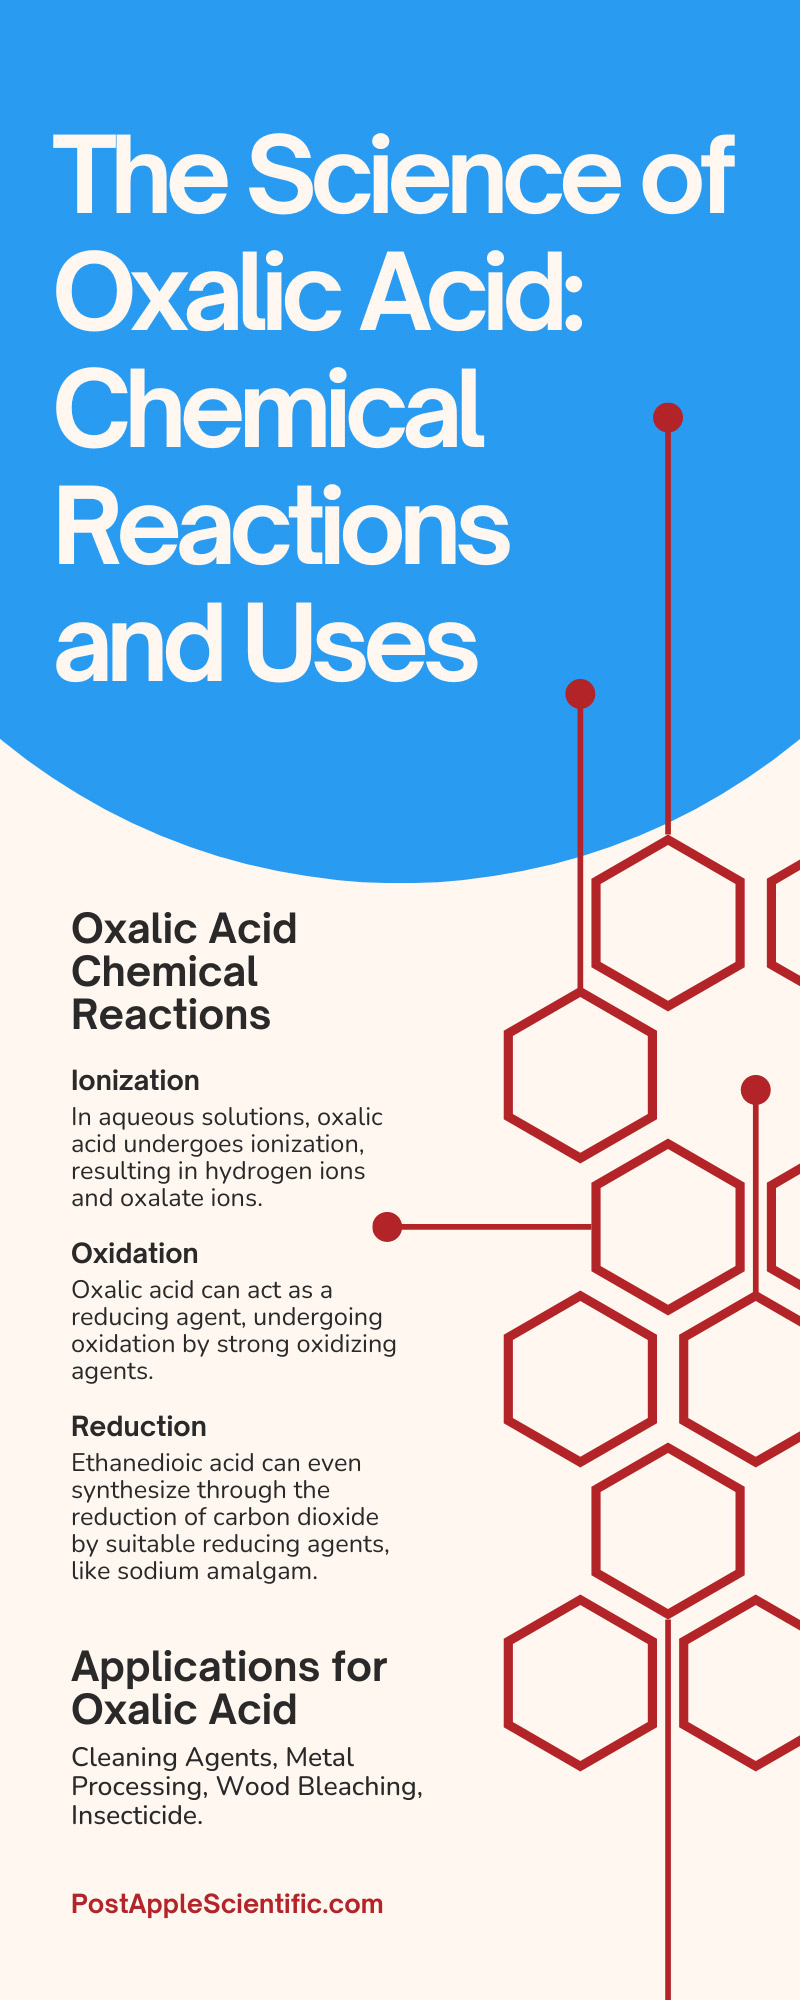 The Science of Oxalic Acid: Chemical Reactions and Uses
